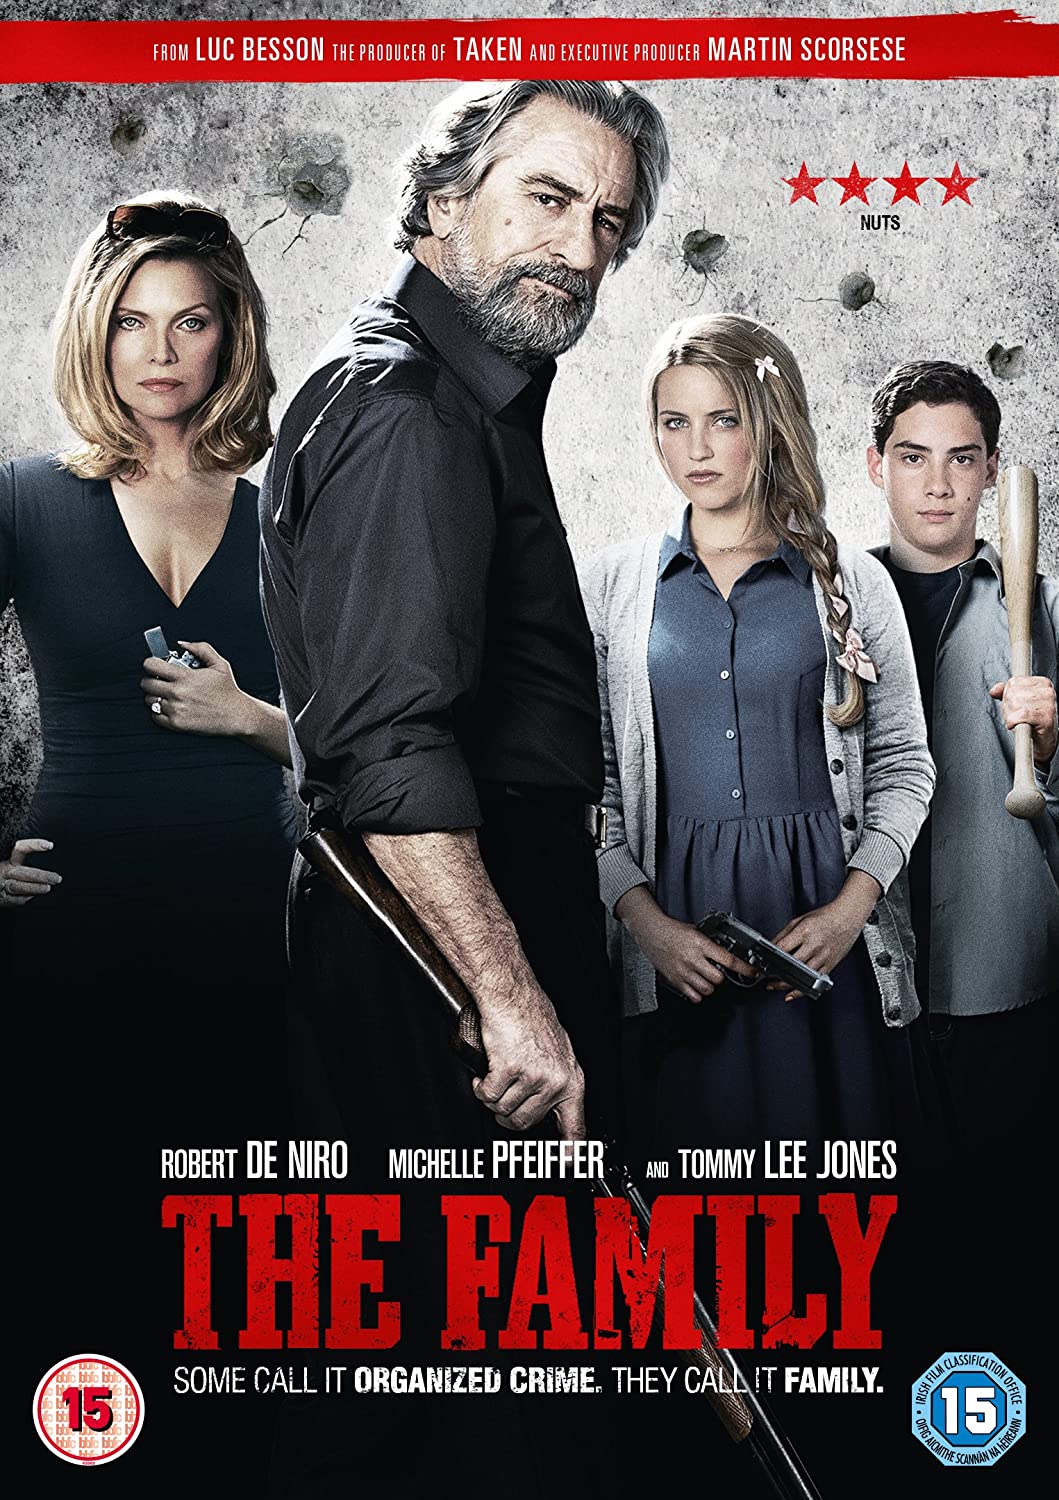 The Family - Action/Comedy [DVD]